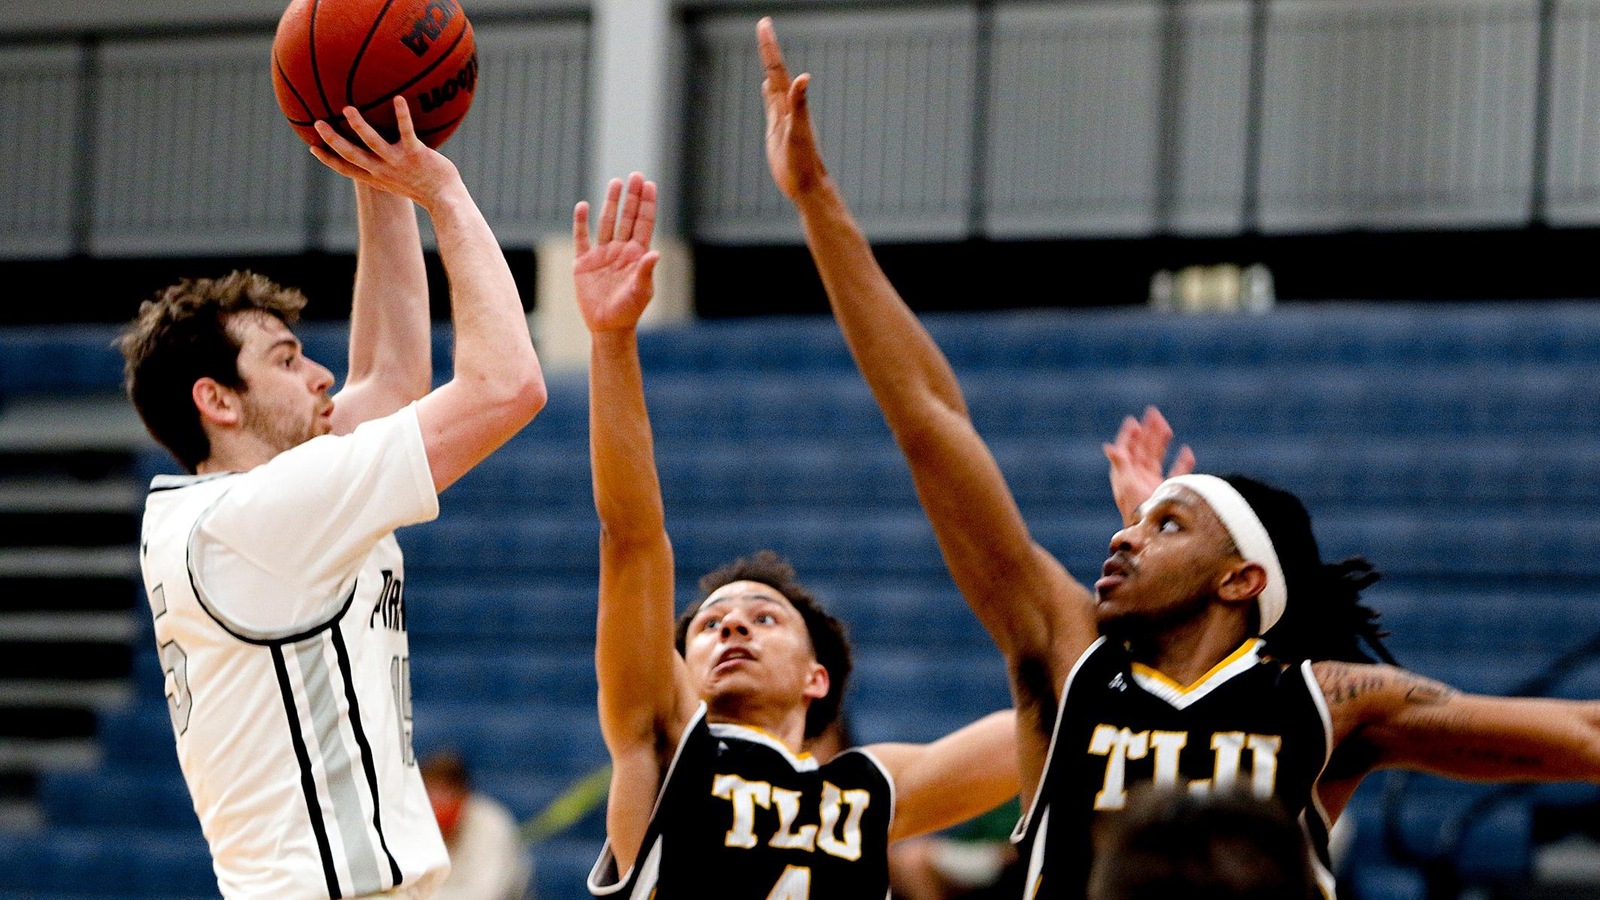 Late Scoring Drought Costs Men's Basketball Against TLU